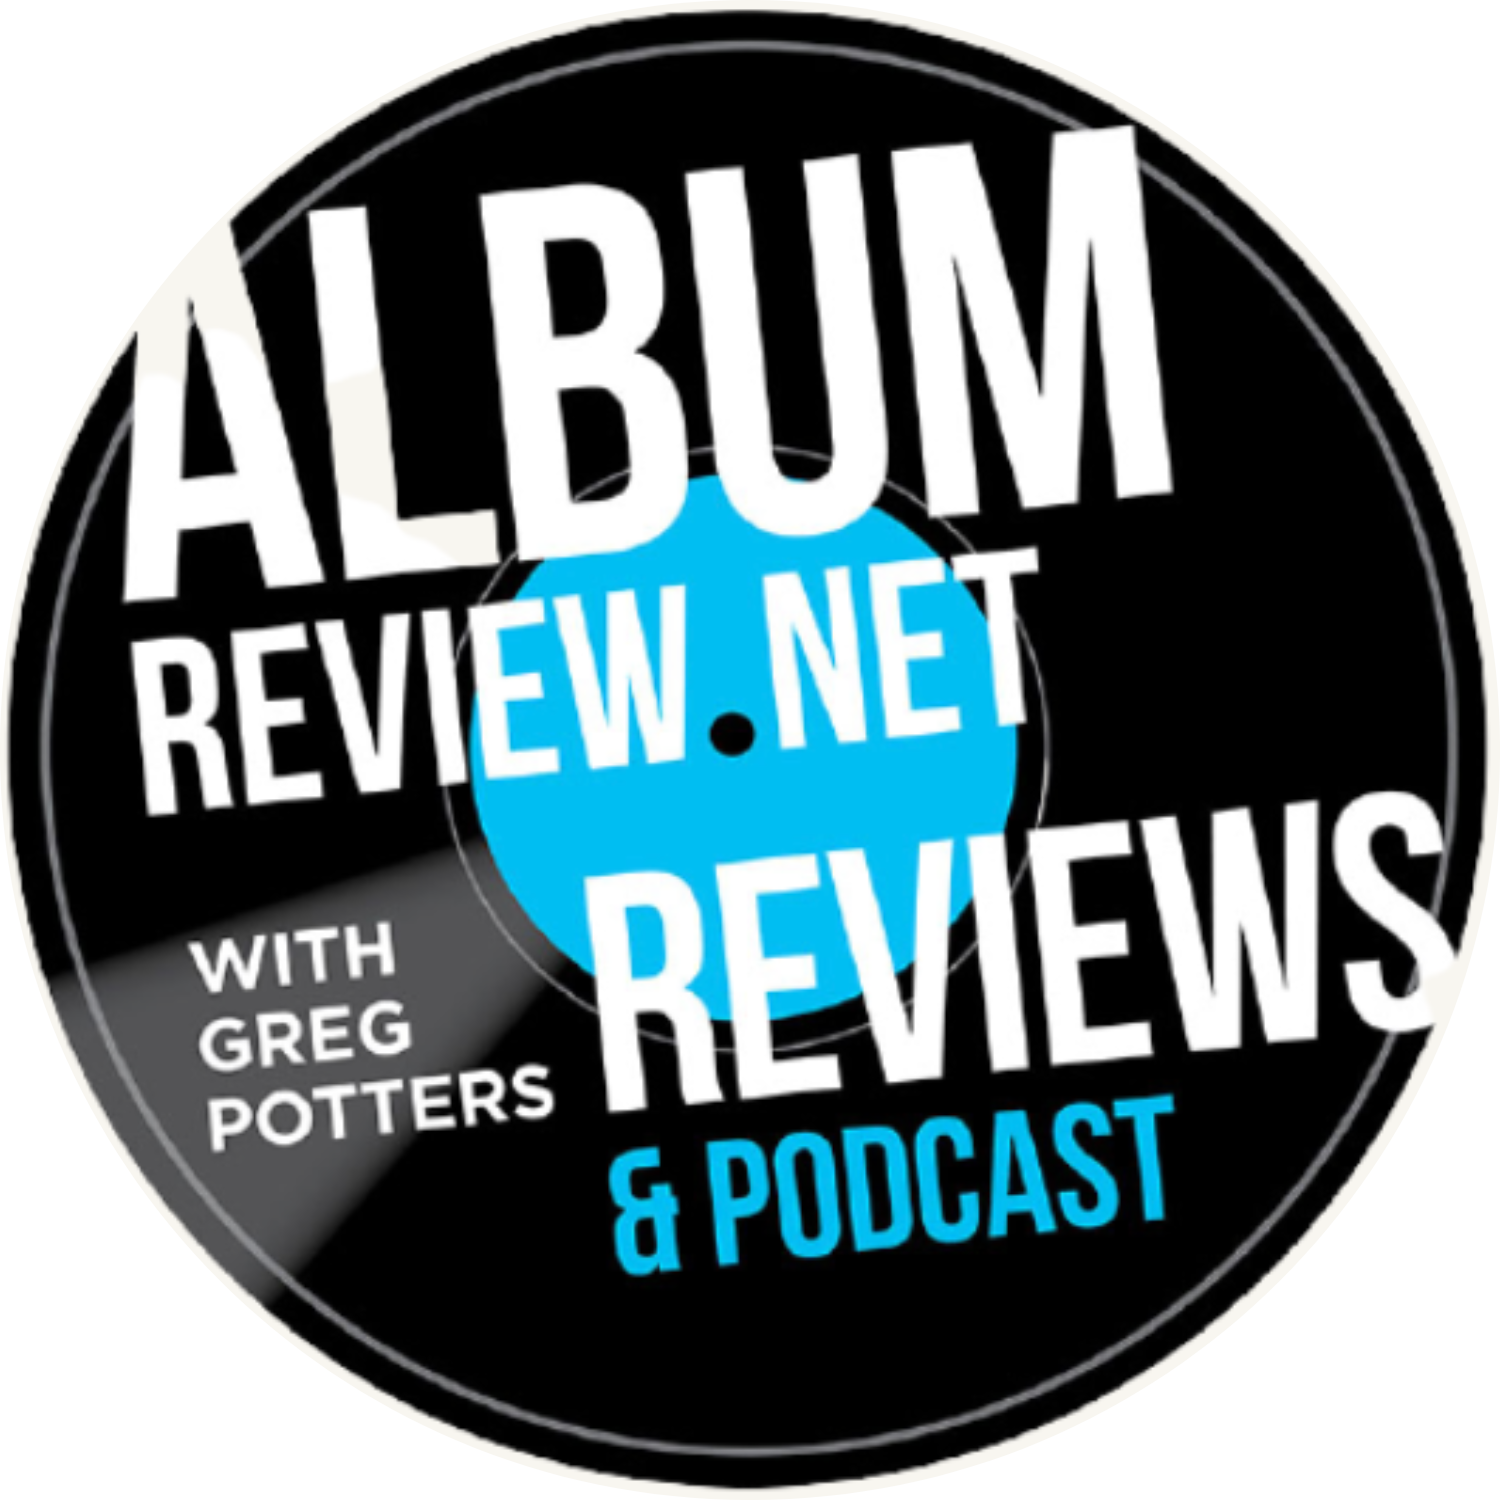 Albumreview.net